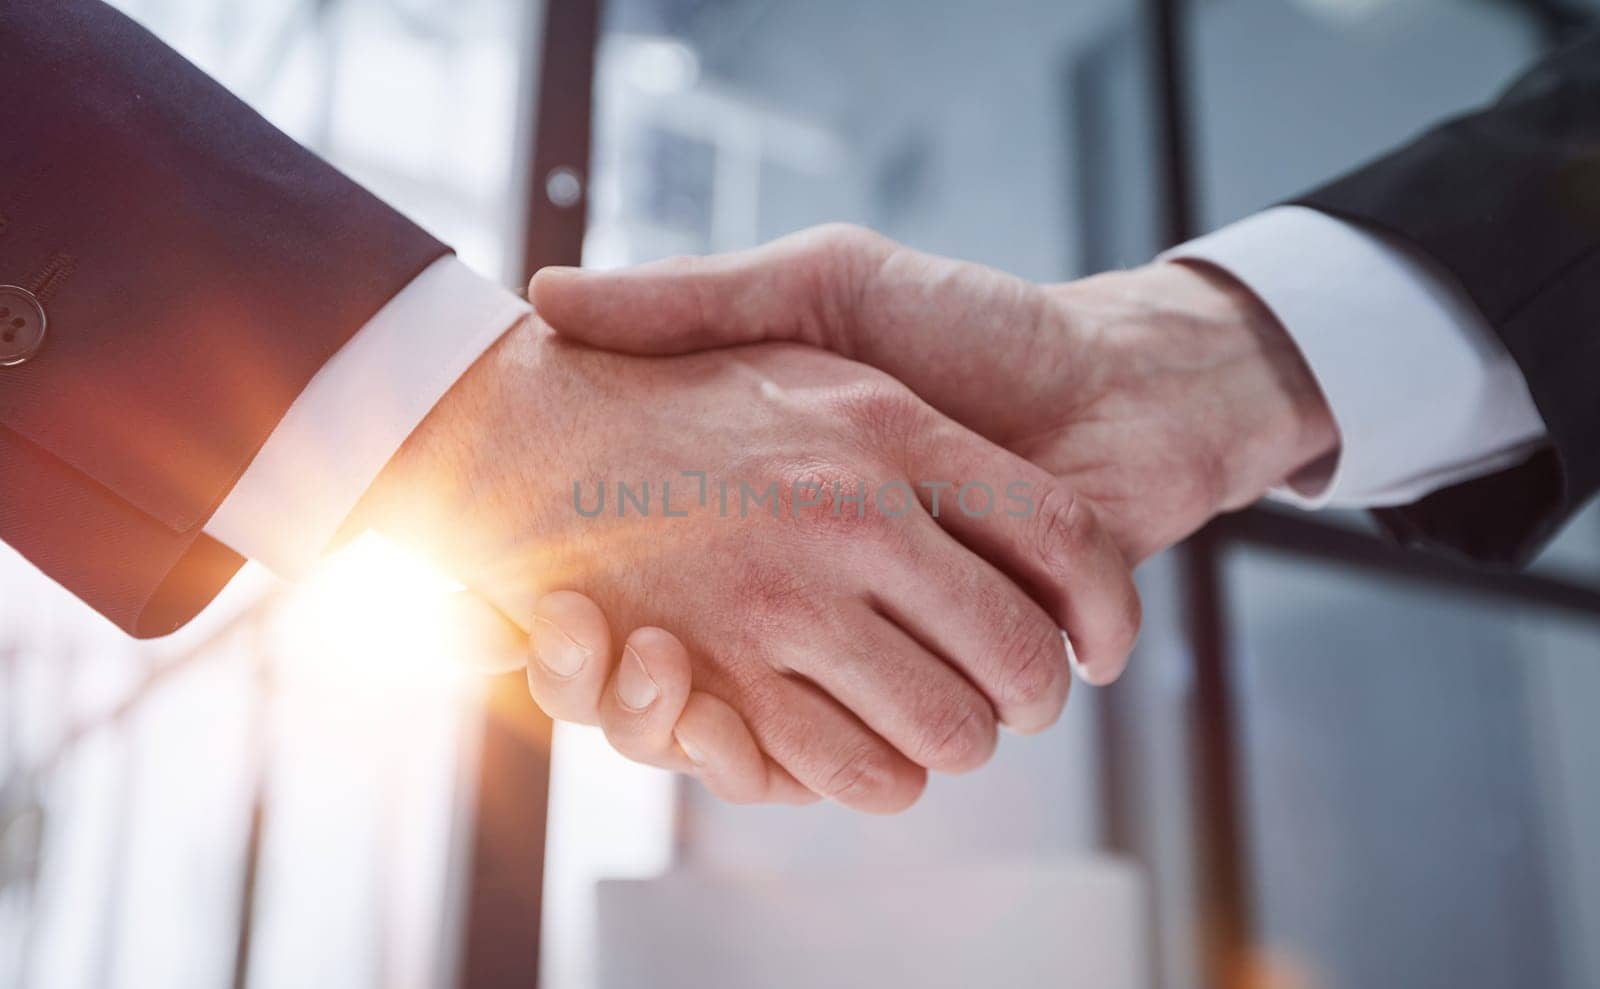 Handshake of two businessmen in a conference room, close-up